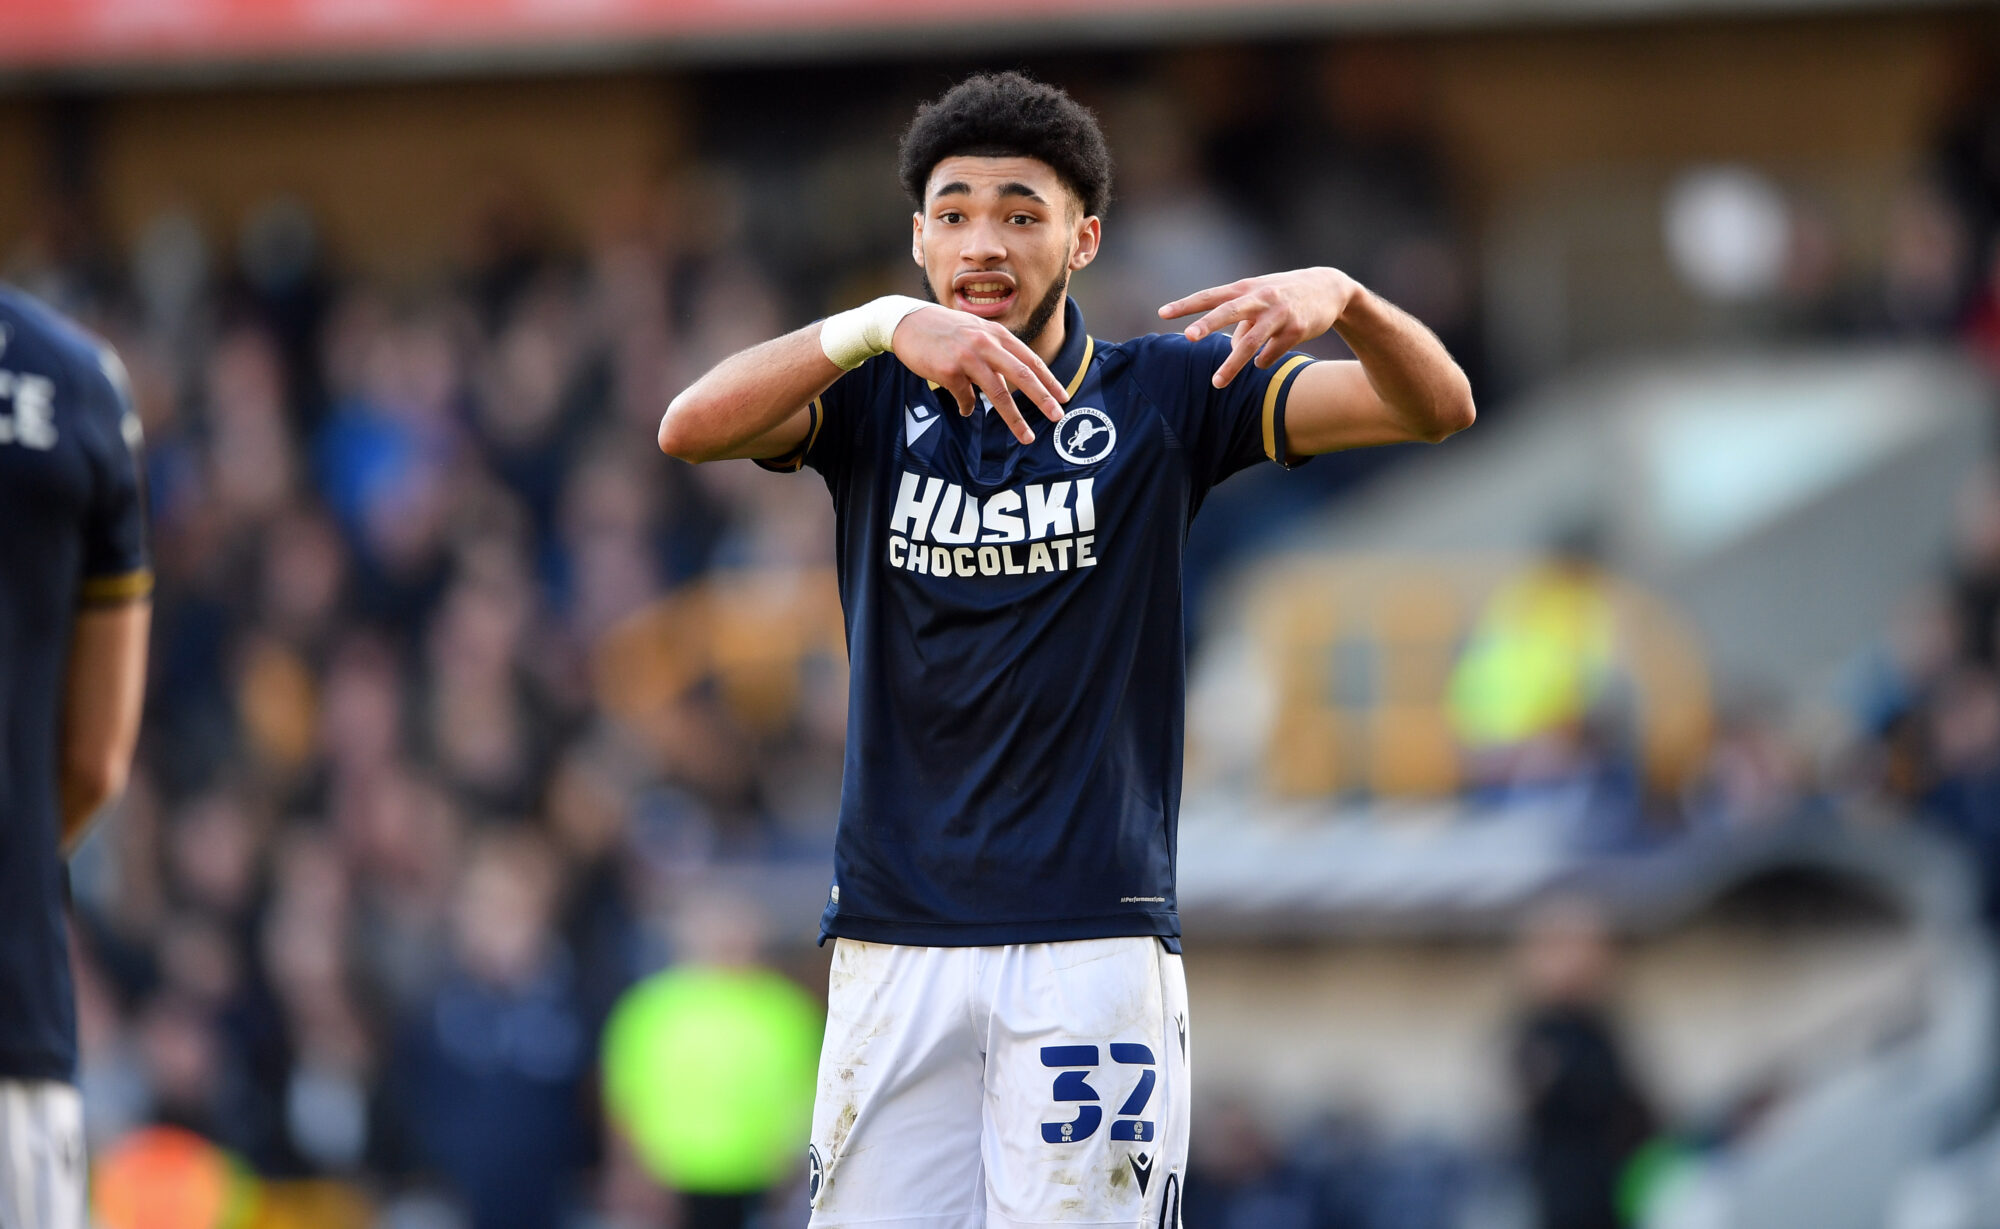 Winger Tyler Burey talks about his switch from AFC Wimbledon to Millwall –  South London News